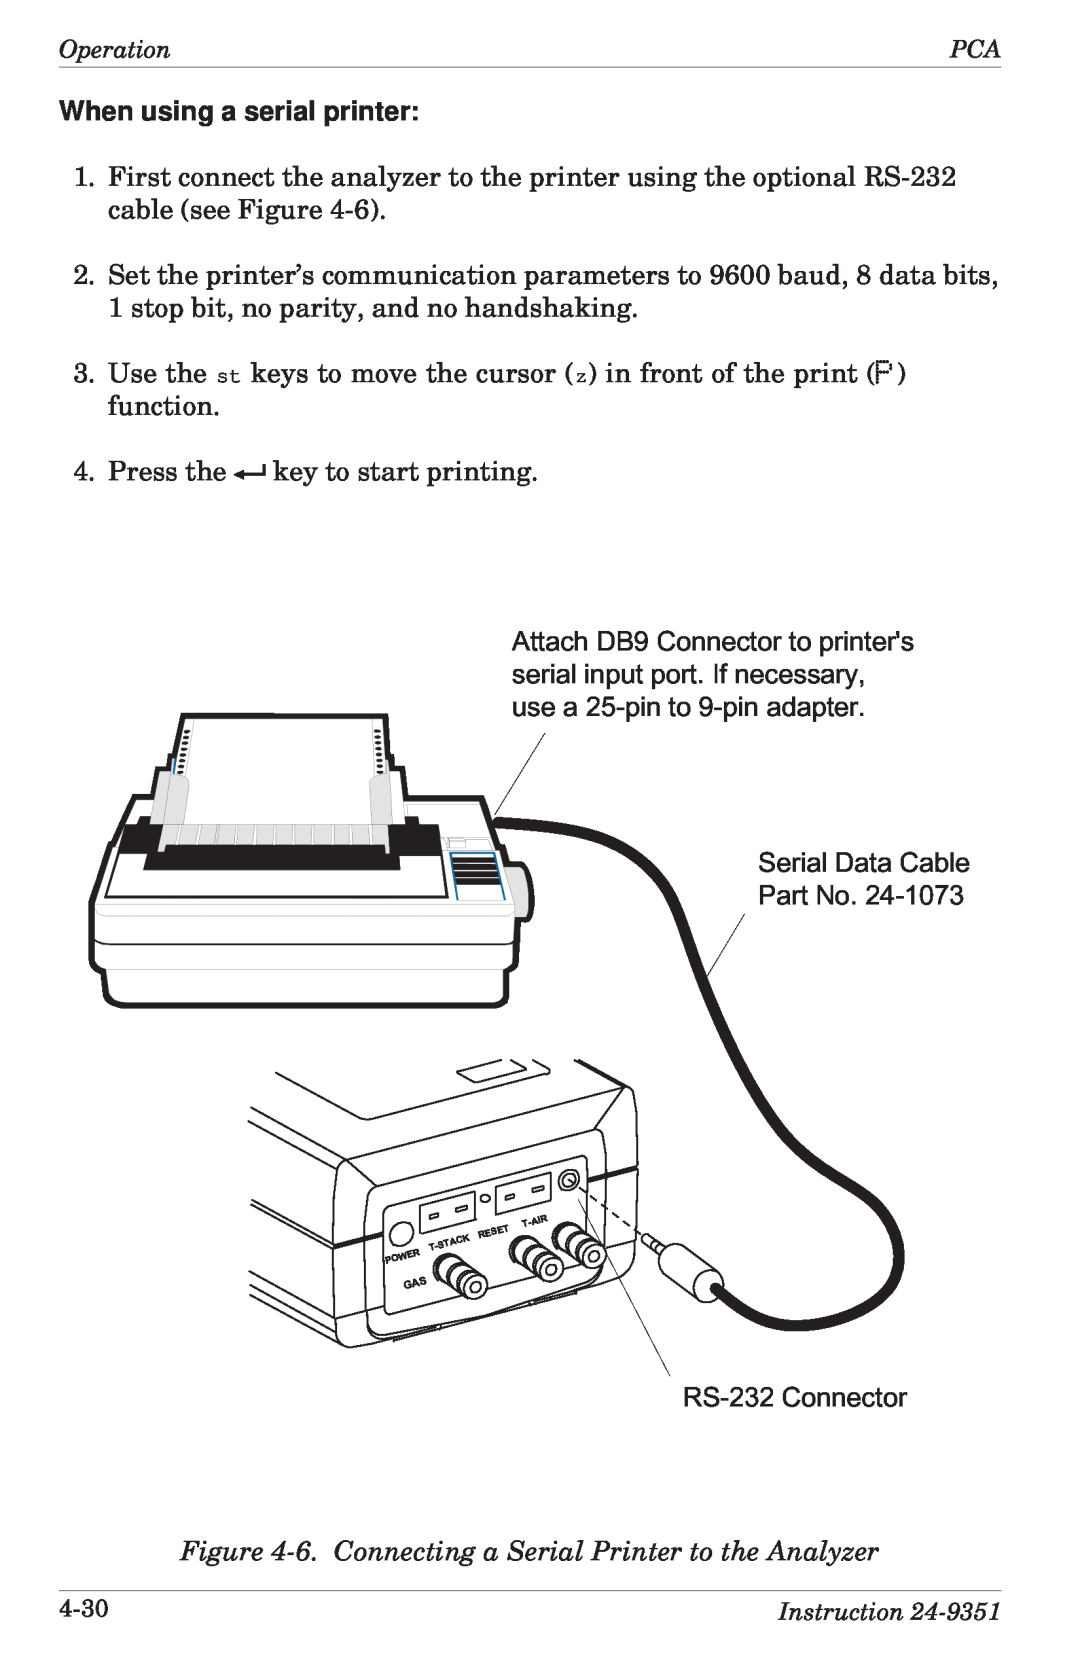 Bacharach 24-9351 manual When using a serial printer, SerialDataCable PartNo.24-1073, RS-232Connector 